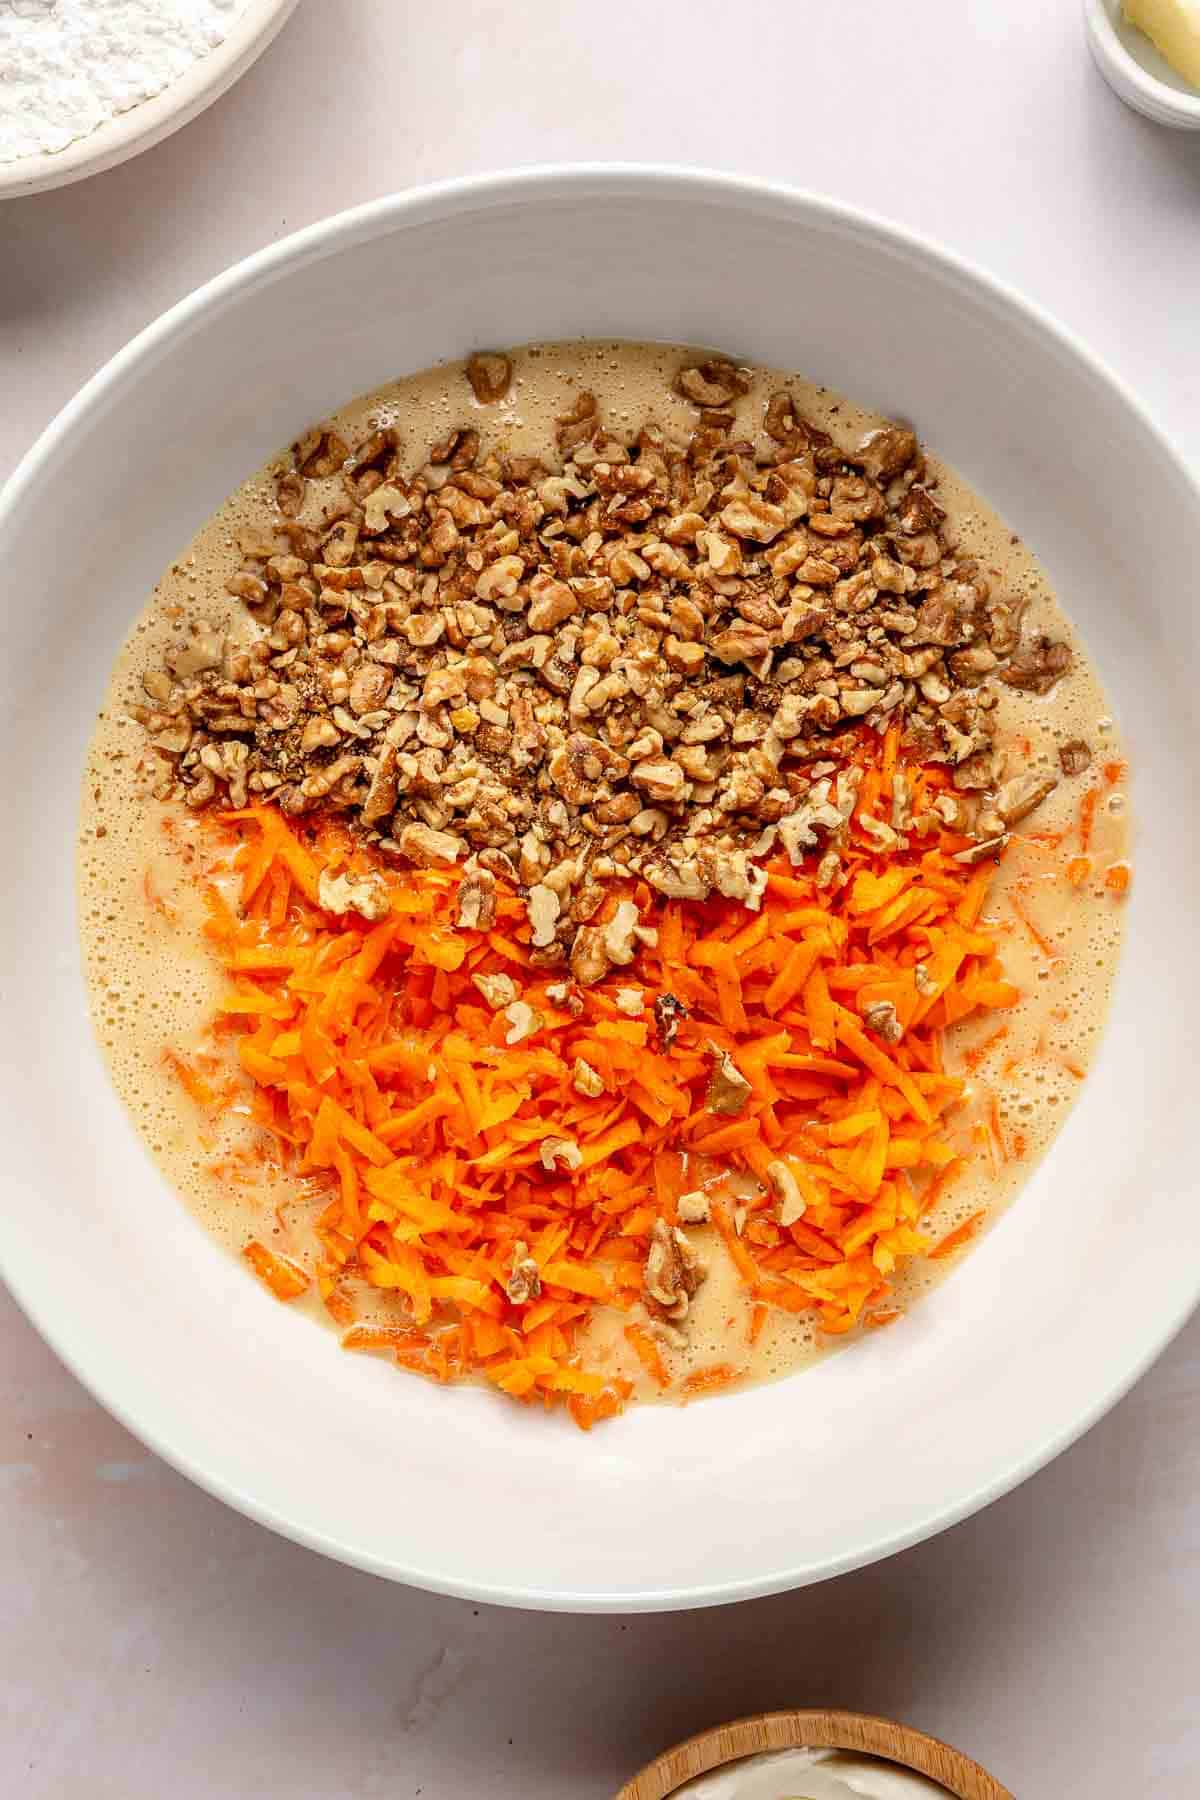 Carrots and walnut in a bowl with egg mixture.